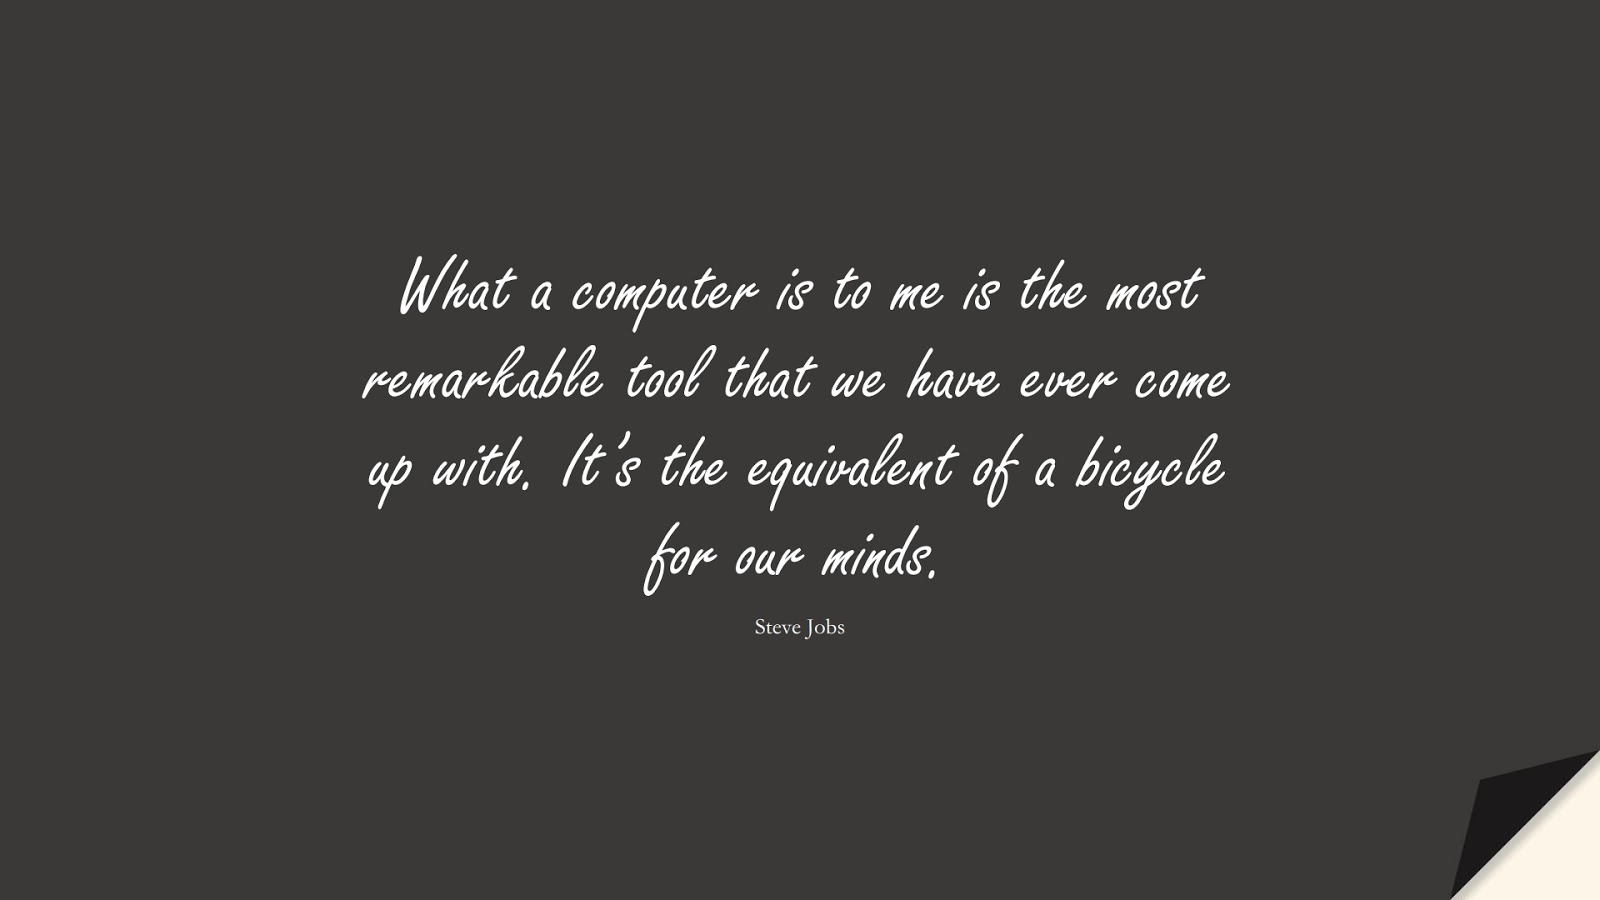 What a computer is to me is the most remarkable tool that we have ever come up with. It’s the equivalent of a bicycle for our minds. (Steve Jobs);  #SteveJobsQuotes